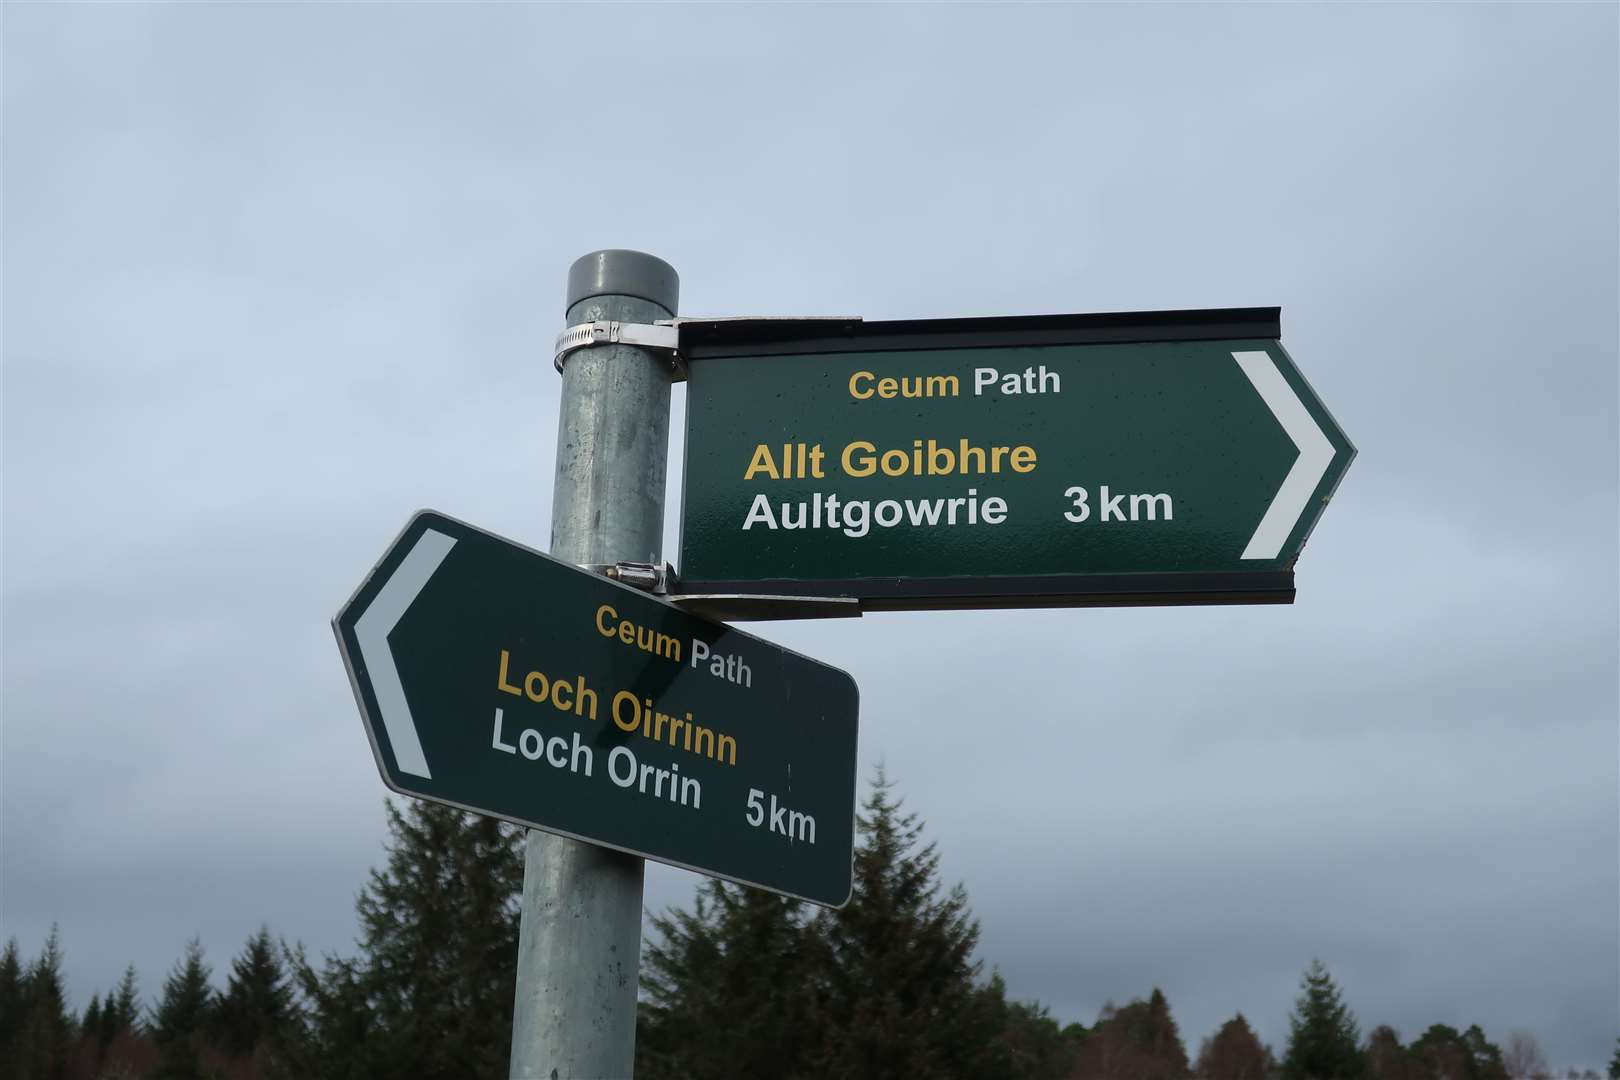 Sign pointing back to Aultgowrie on the southern side of the river.